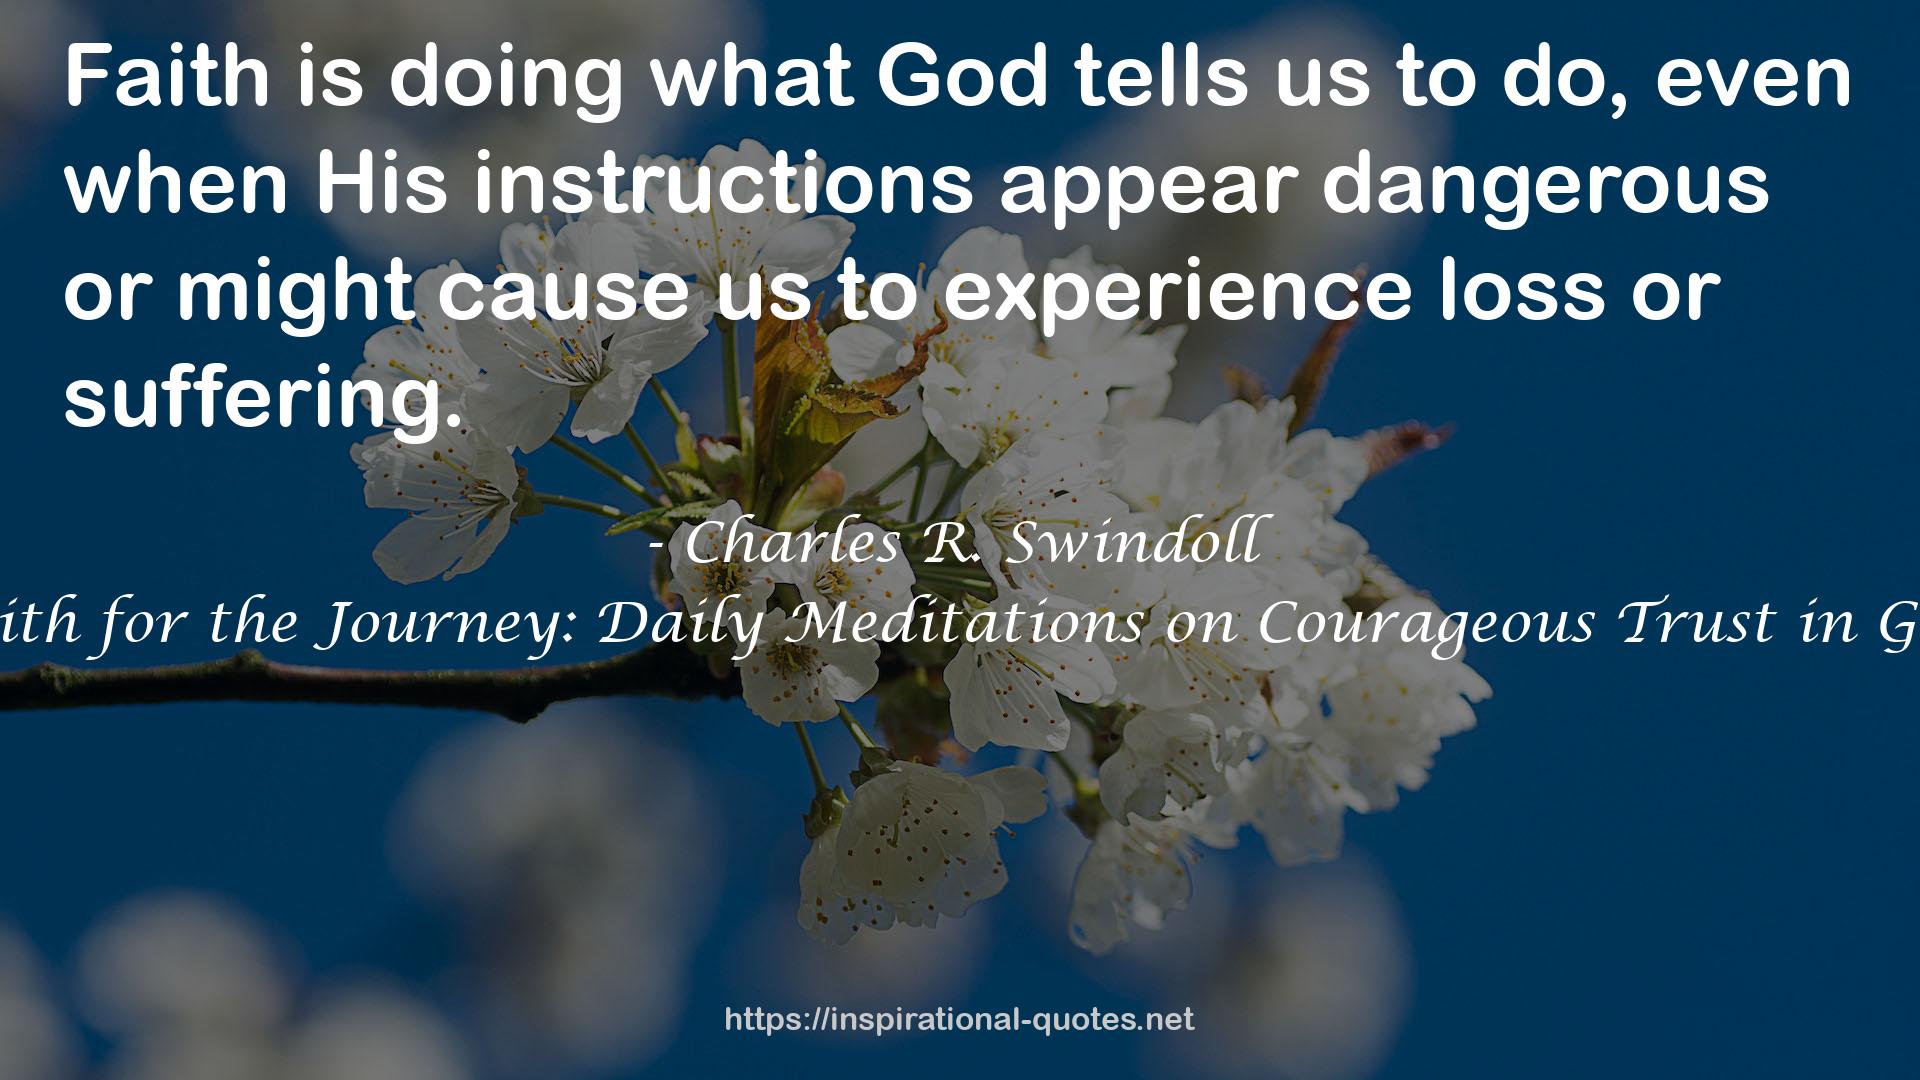 Faith for the Journey: Daily Meditations on Courageous Trust in God QUOTES